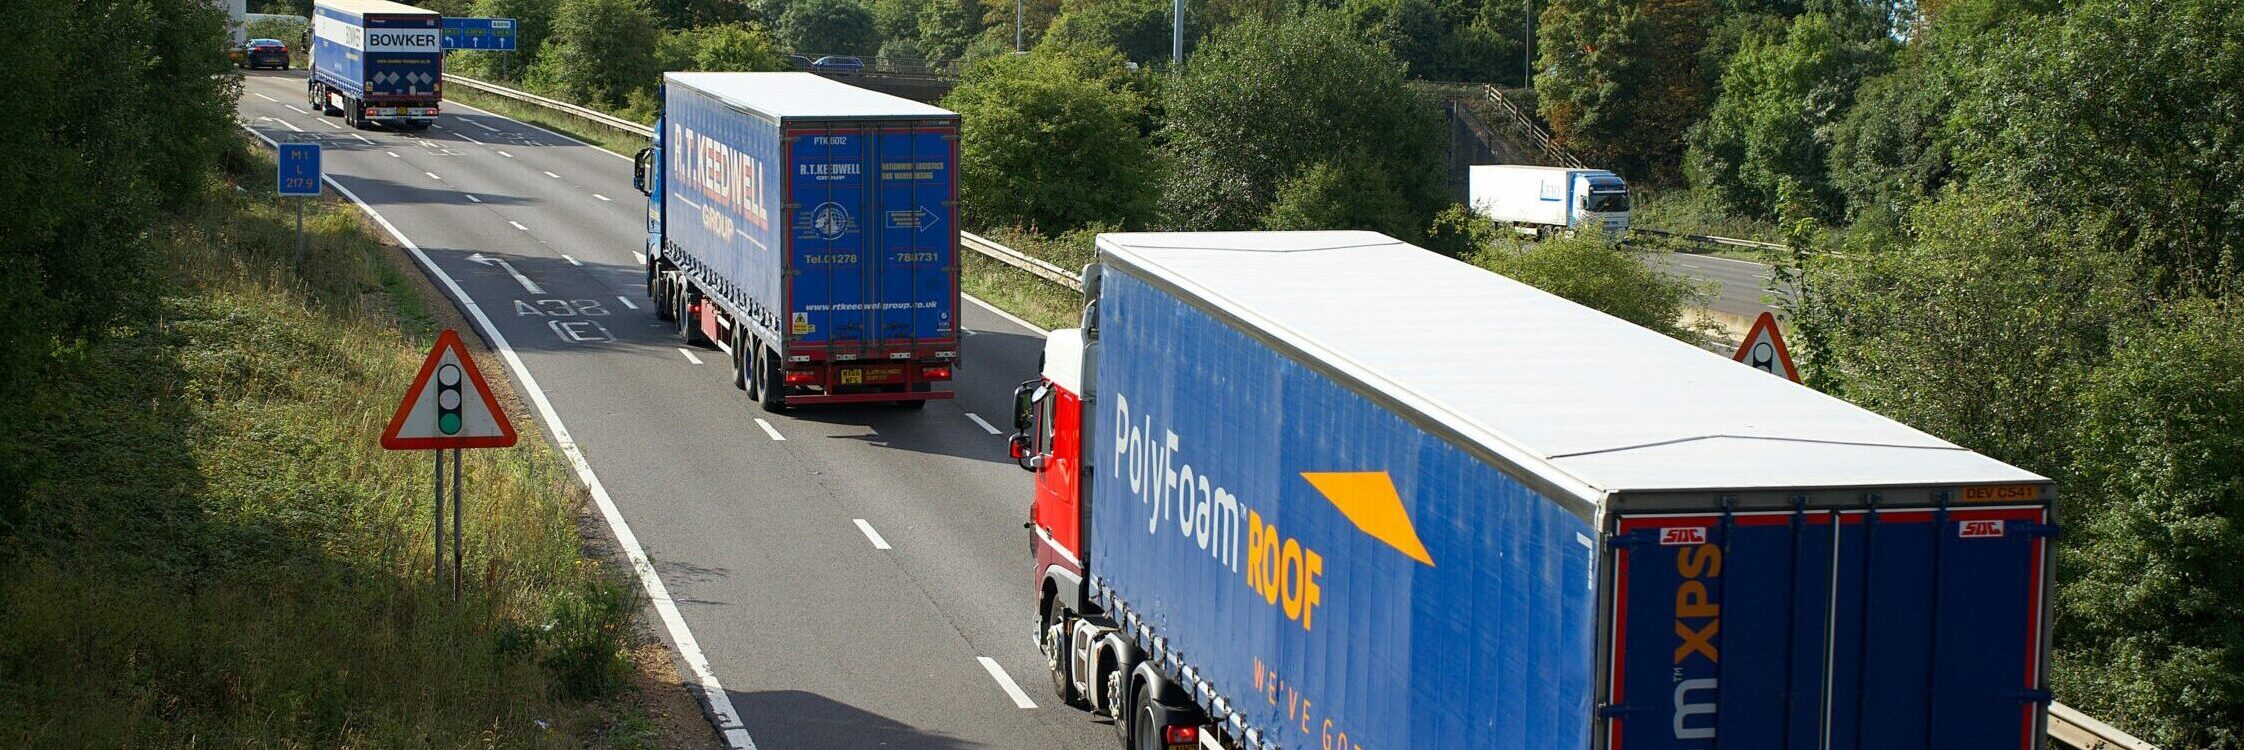 image of three hgv vehicles driving on the road